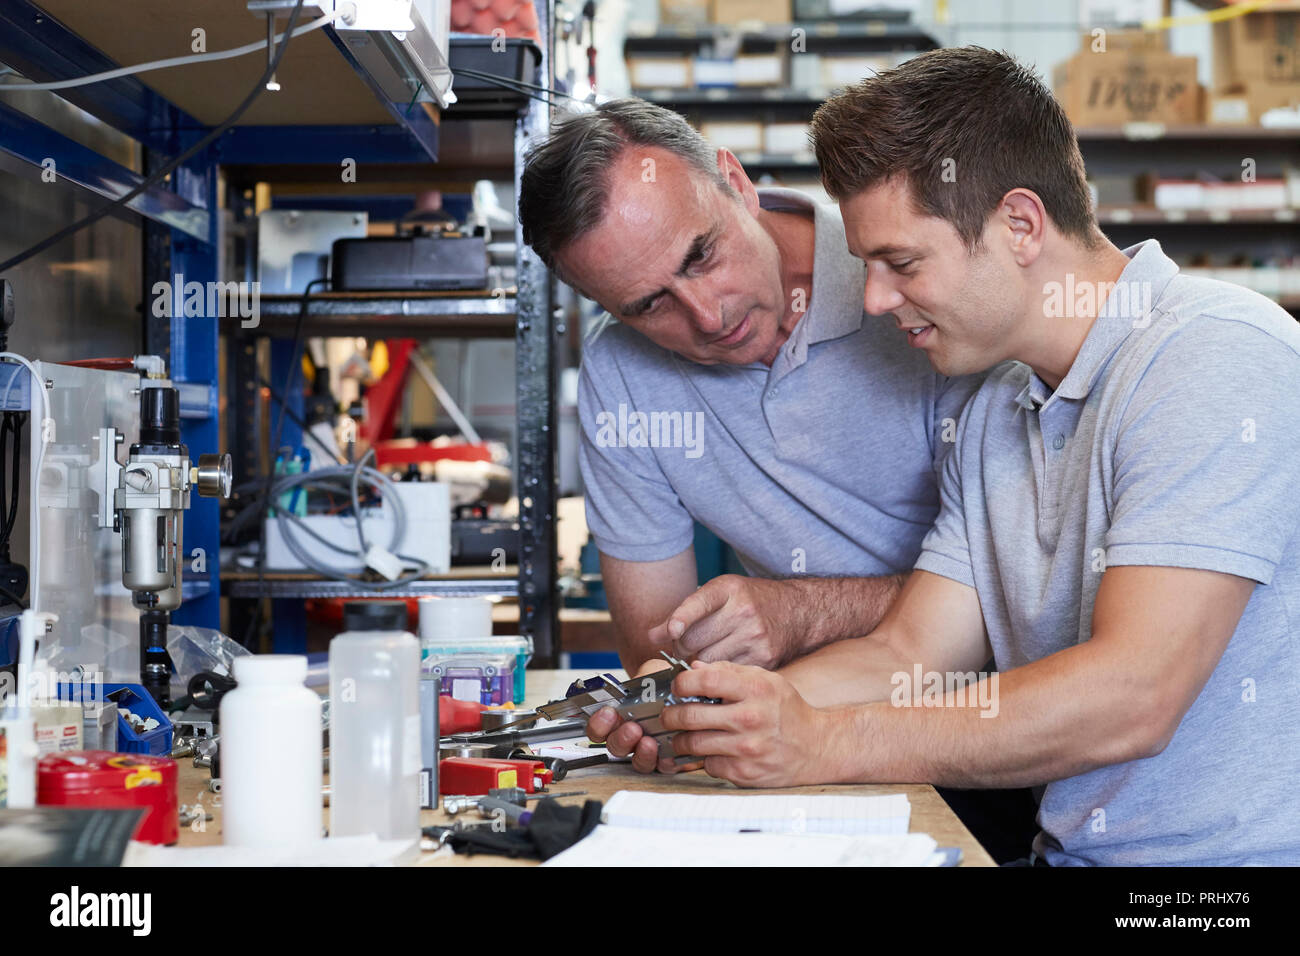 Engineer Helping Male Apprentice In Factory To Measure Component Using Micrometer Stock Photo